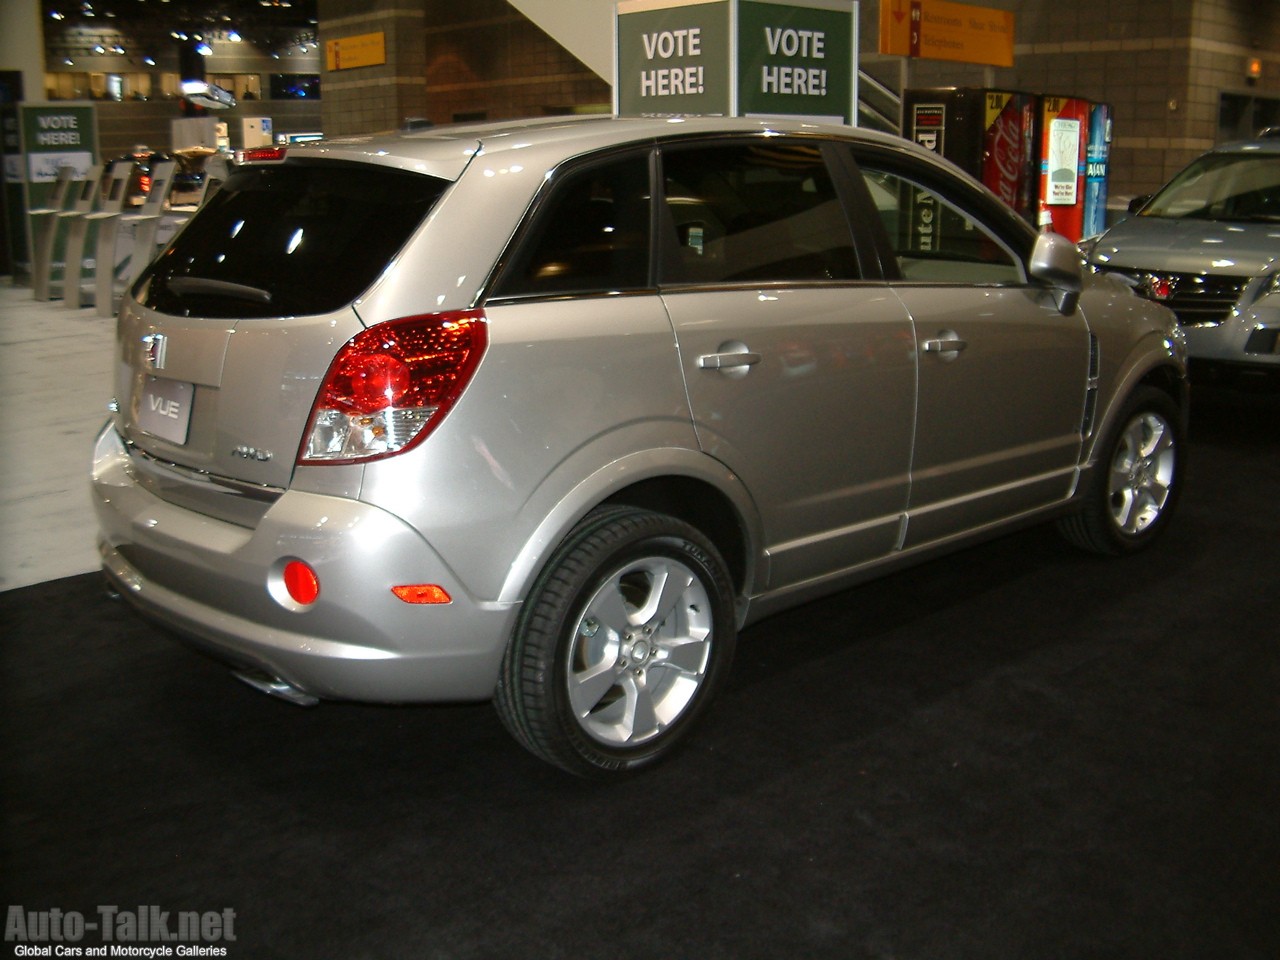 2008 Saturn VUE Red Line at Chicago Auto Show